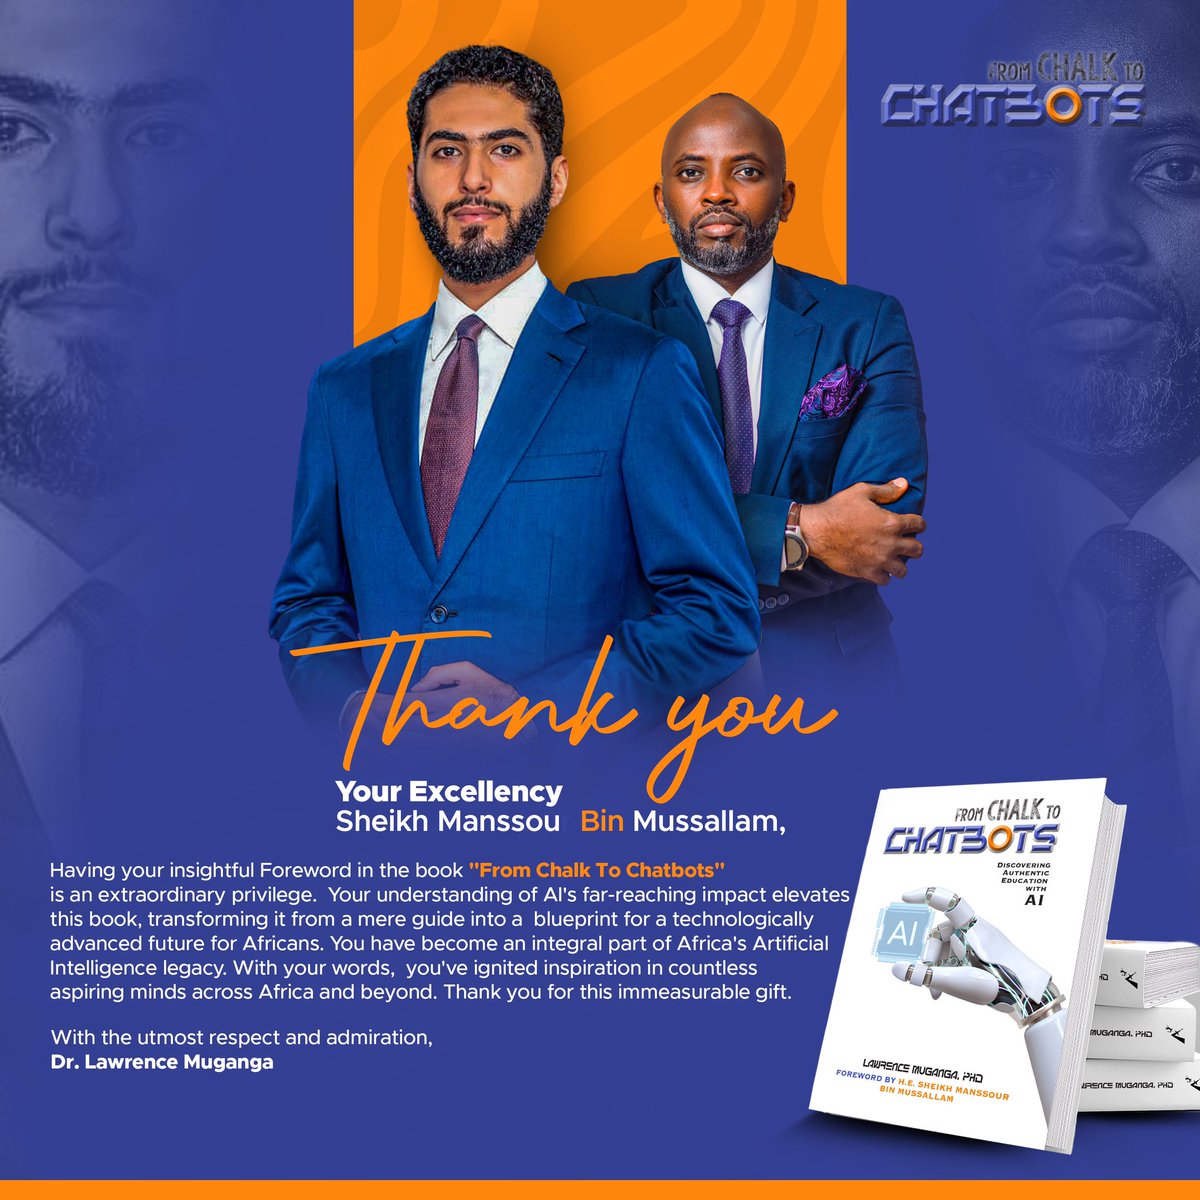 Your Excellency Sheikh @MBinMussallam, Secretary-General of the Organisation of Southern Cooperation (OSC), it is an honor to have your foreword in “From Chalk to Chatbots.” Your deep and broad understanding of AI's impact enriches this book, elevating it from a mere guide to a…